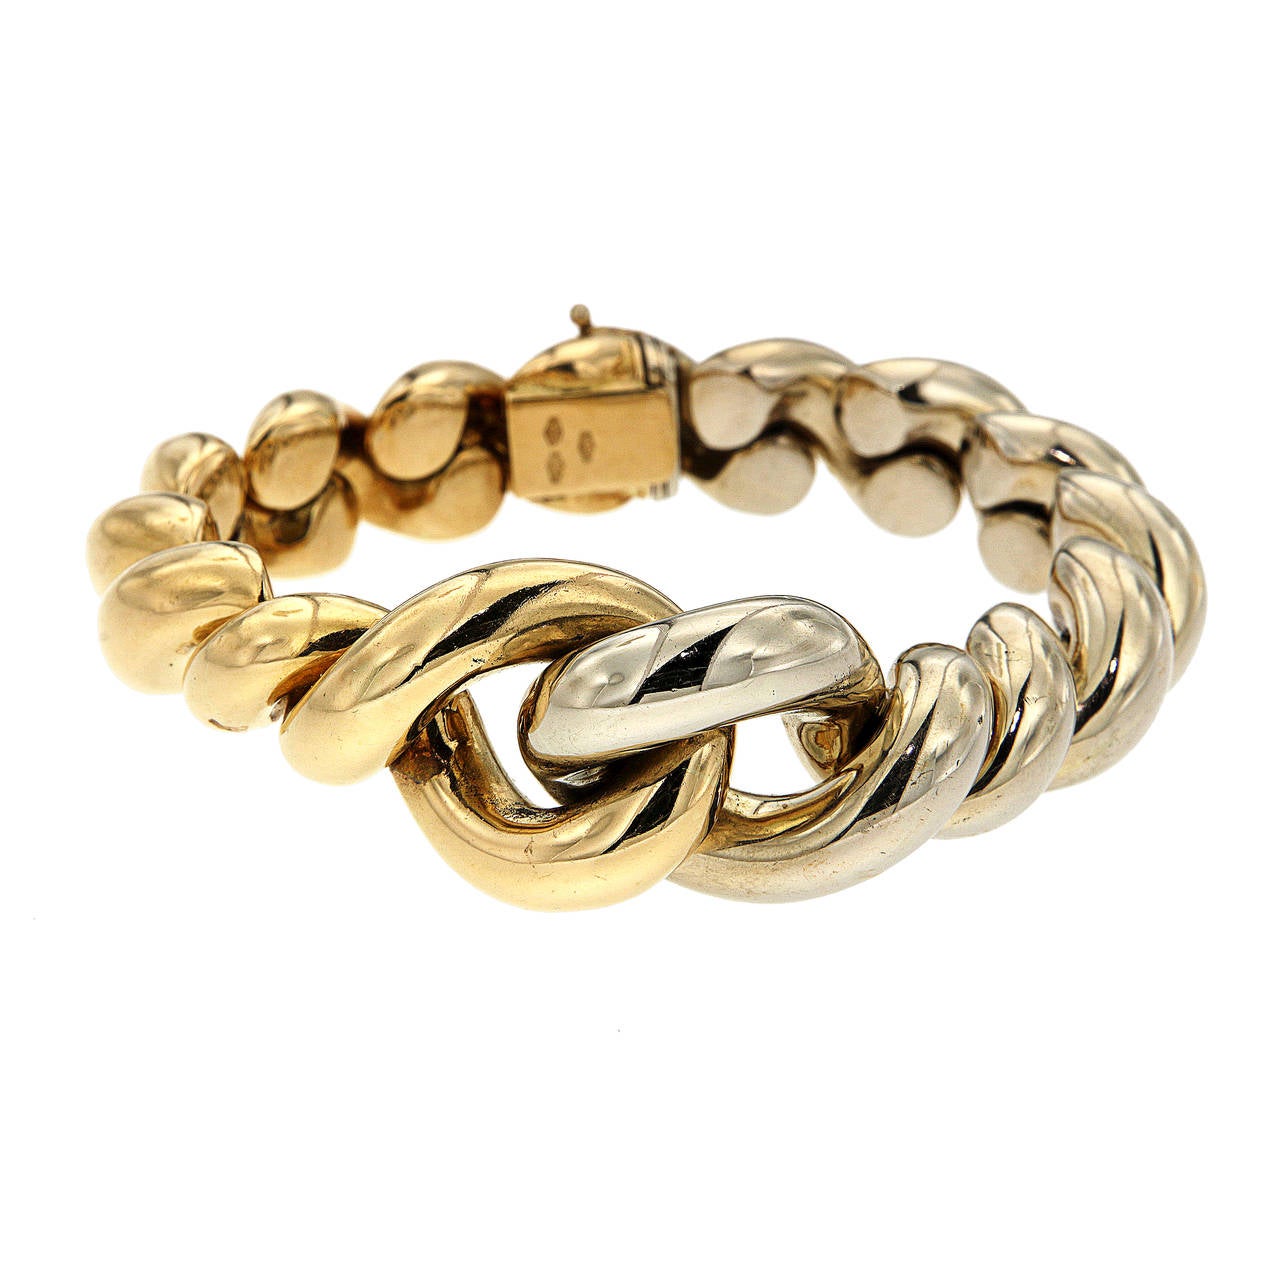 Excellent  Italian White and Yellow Gold 18k Bracelet